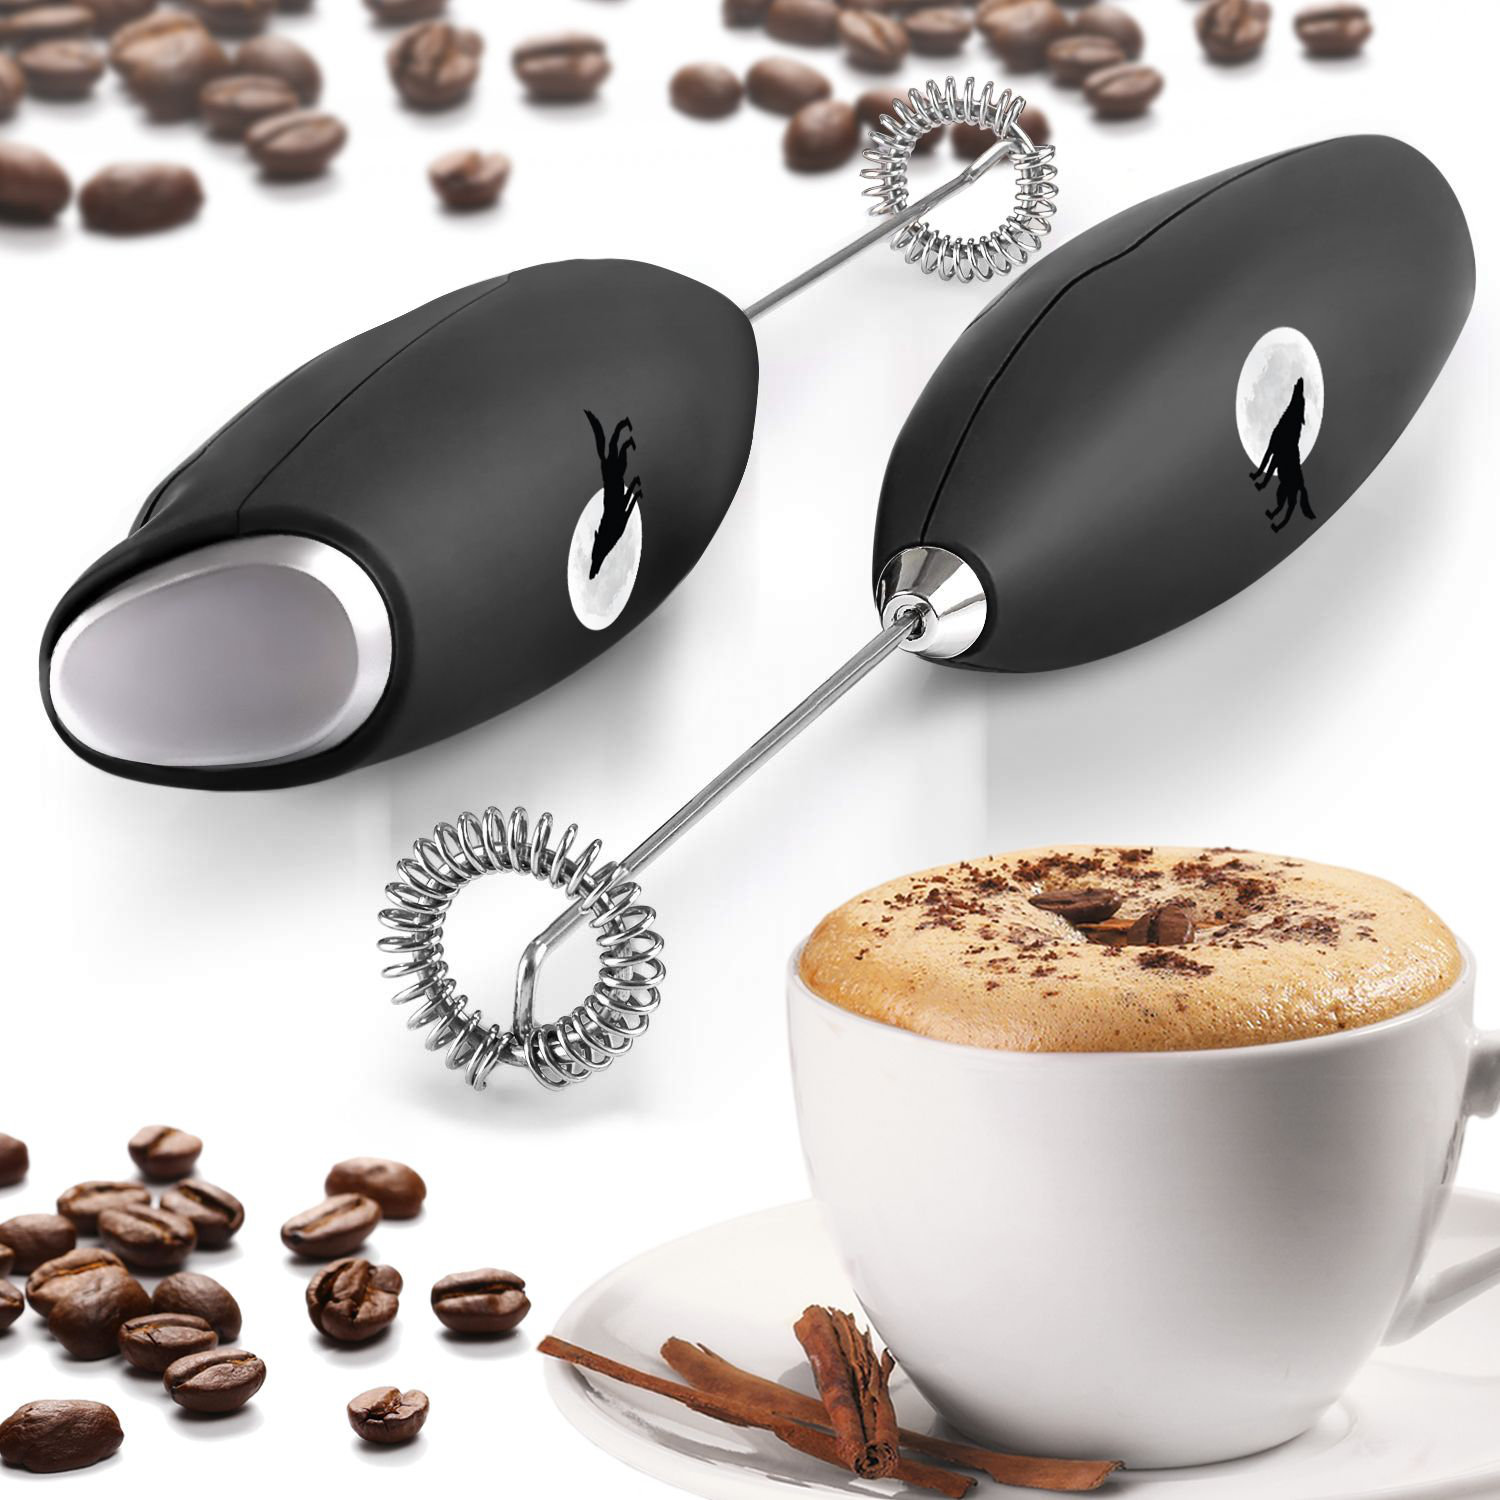 PowerLix Handheld Milk Frother Complete Set with Stainless Steel